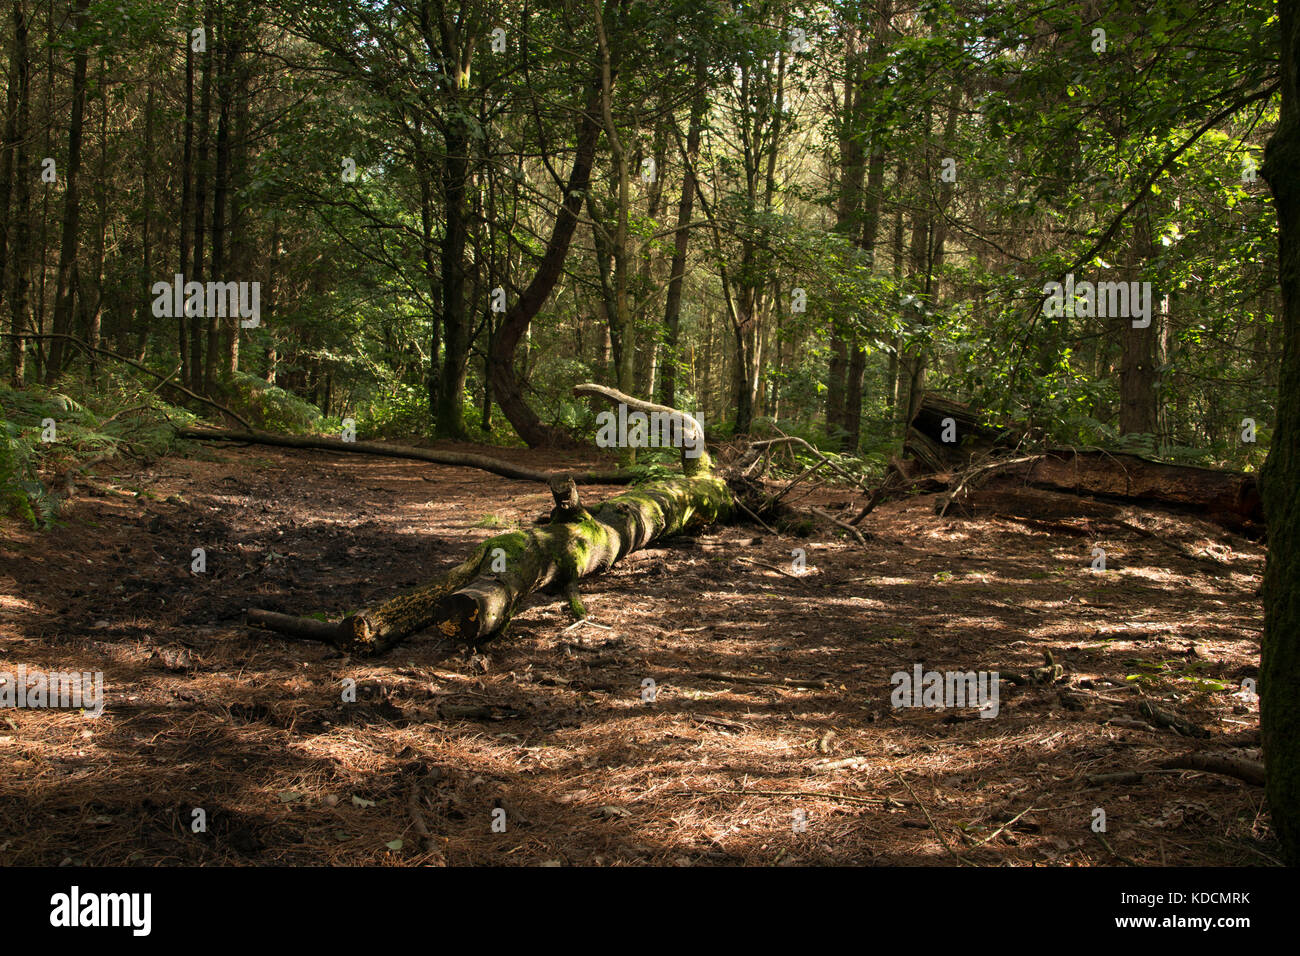 Woodlands, Fallen Tree, Wooded Area. Stock Photo